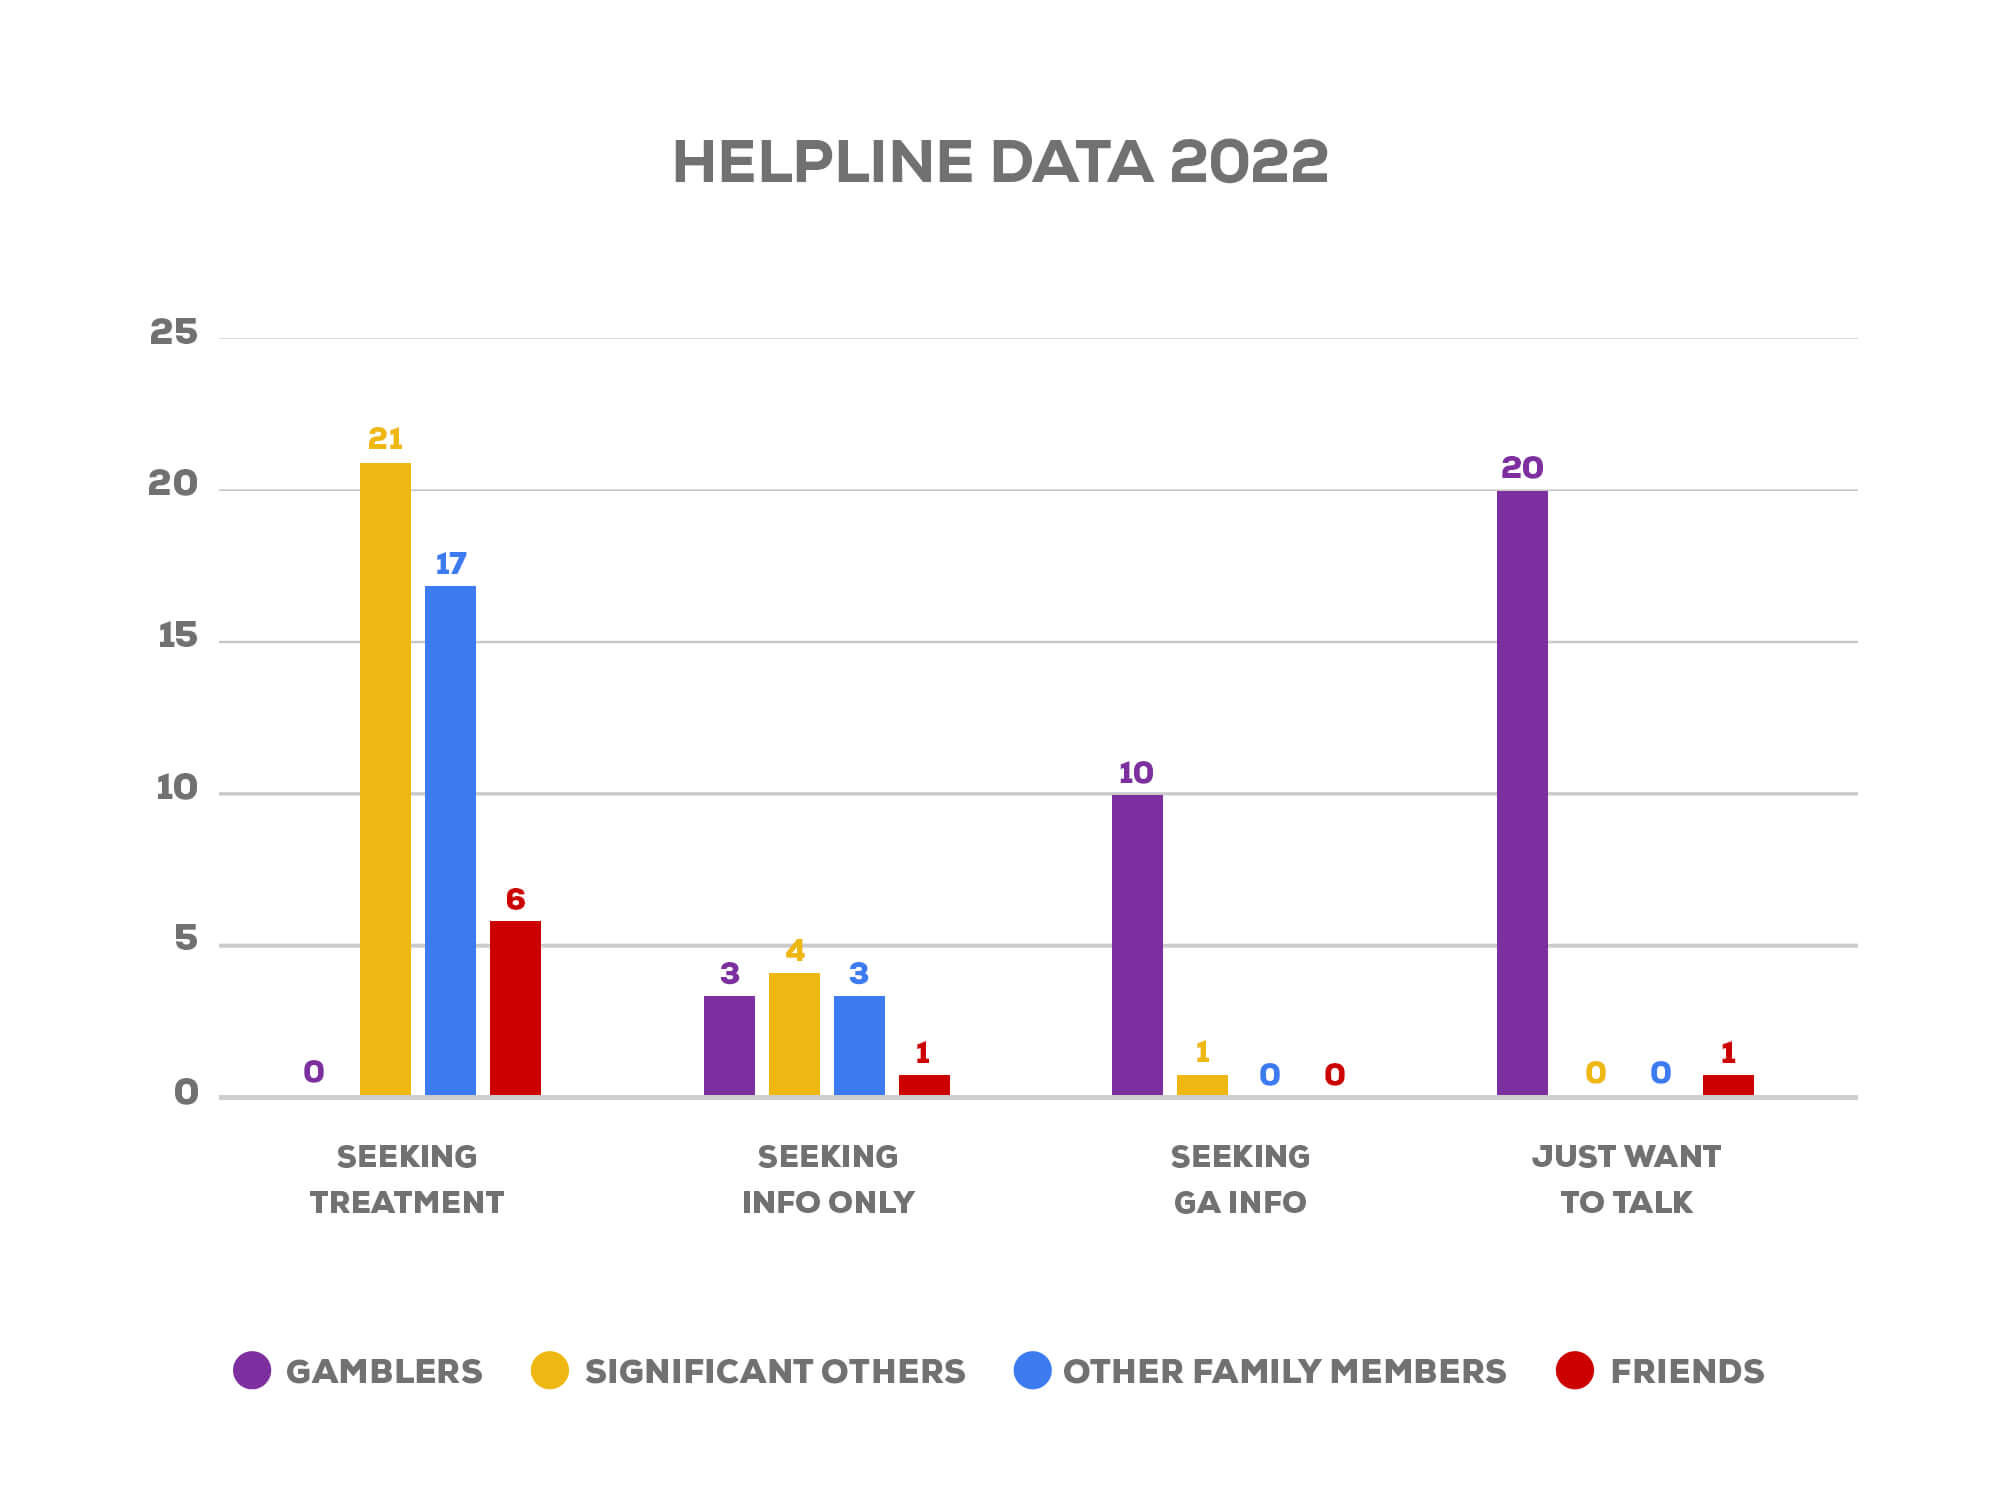 graph displaying key Helpline data points in 2022